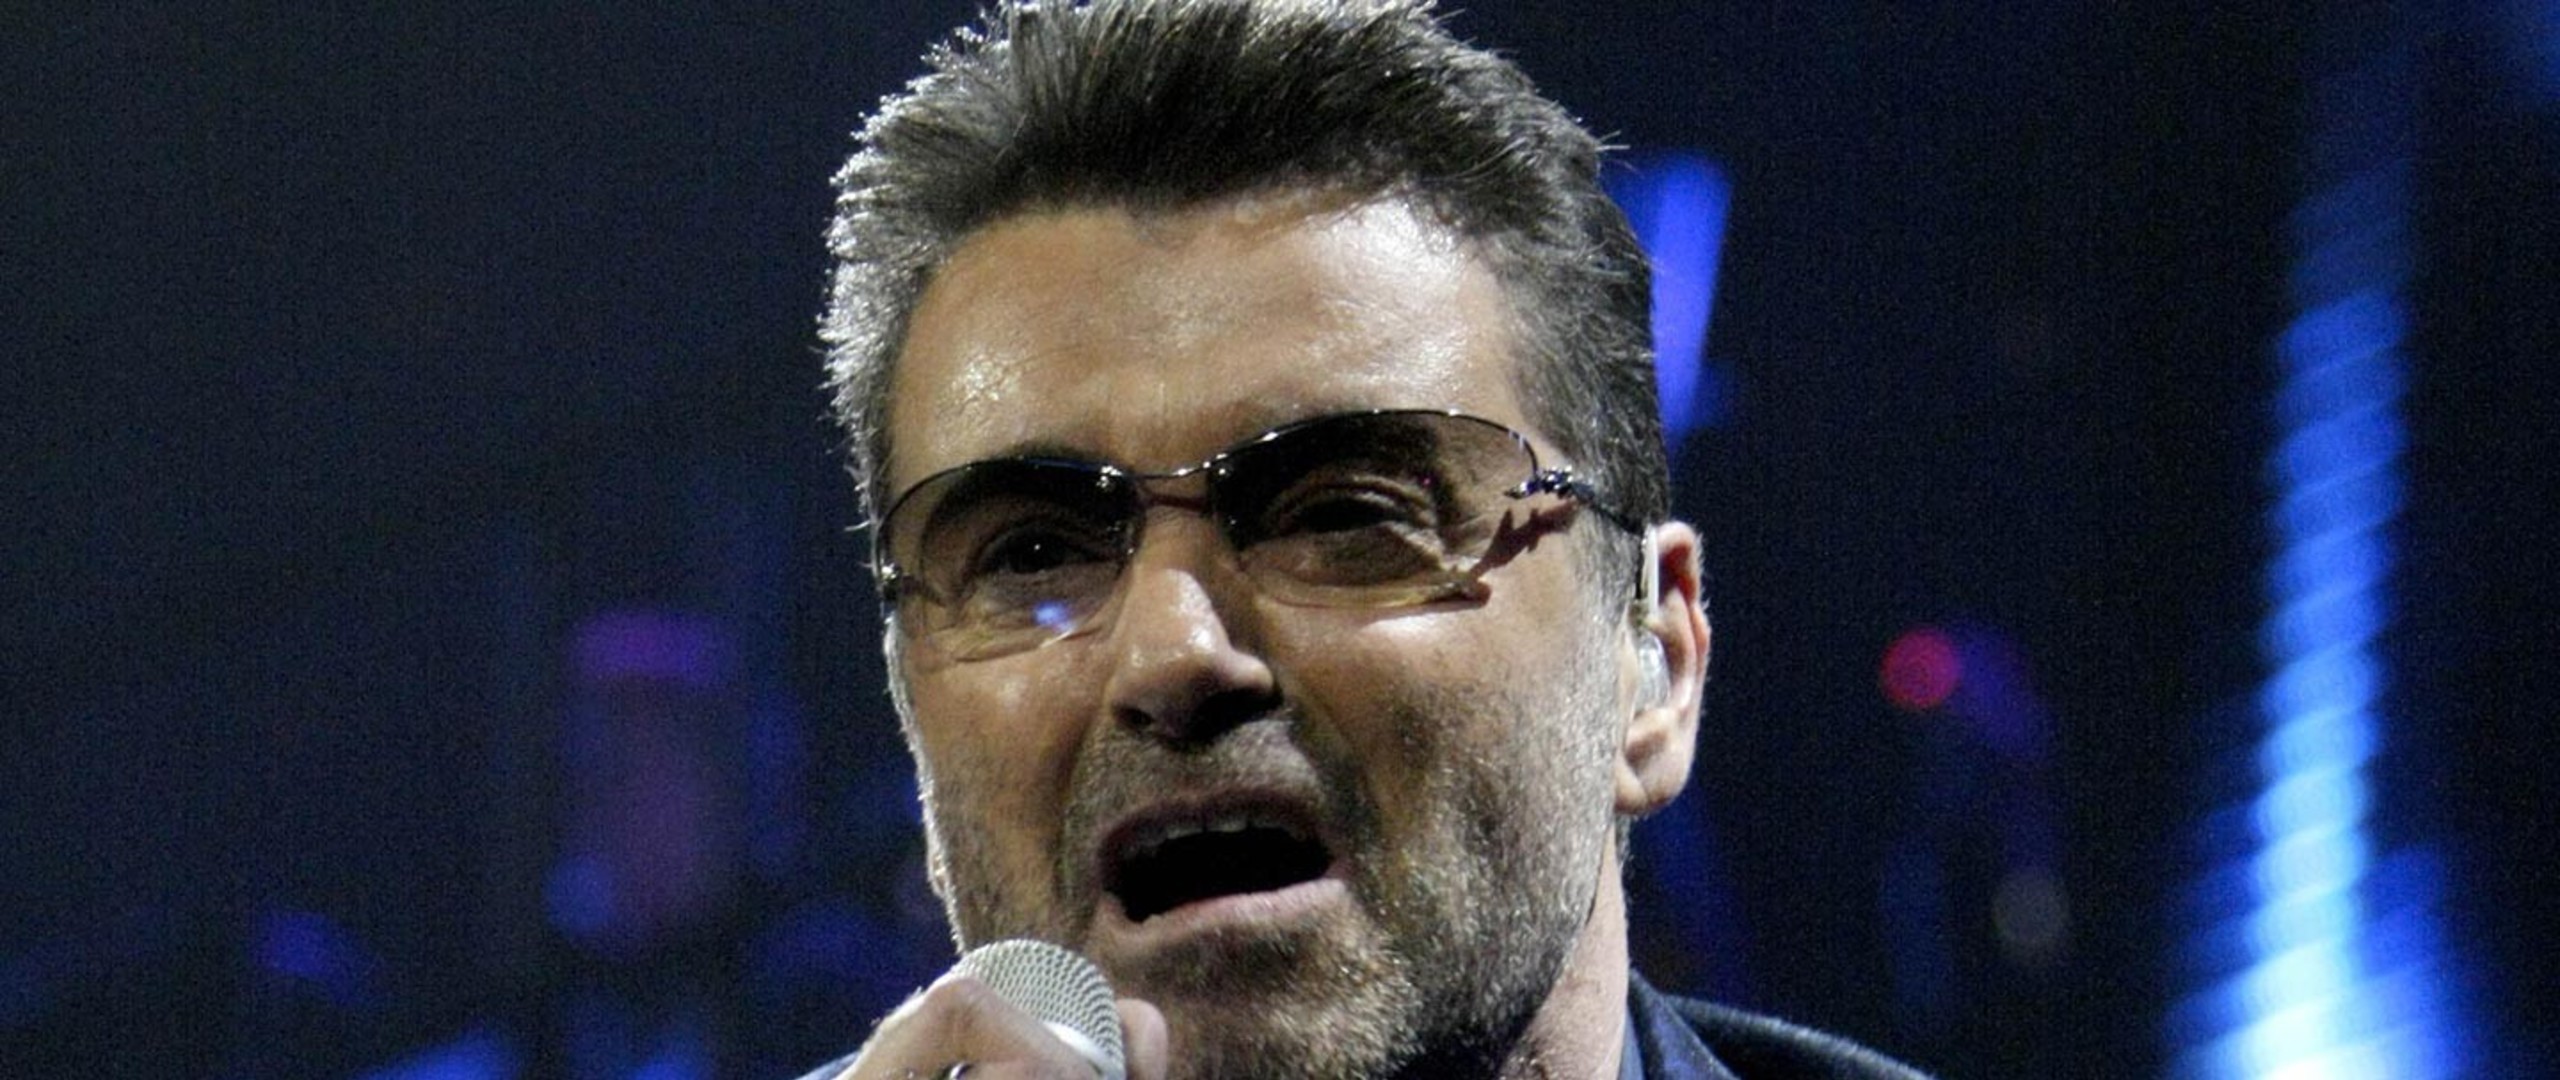 George Michael Wallpapers Images Photos Pictures Backgrounds - Player - HD Wallpaper 